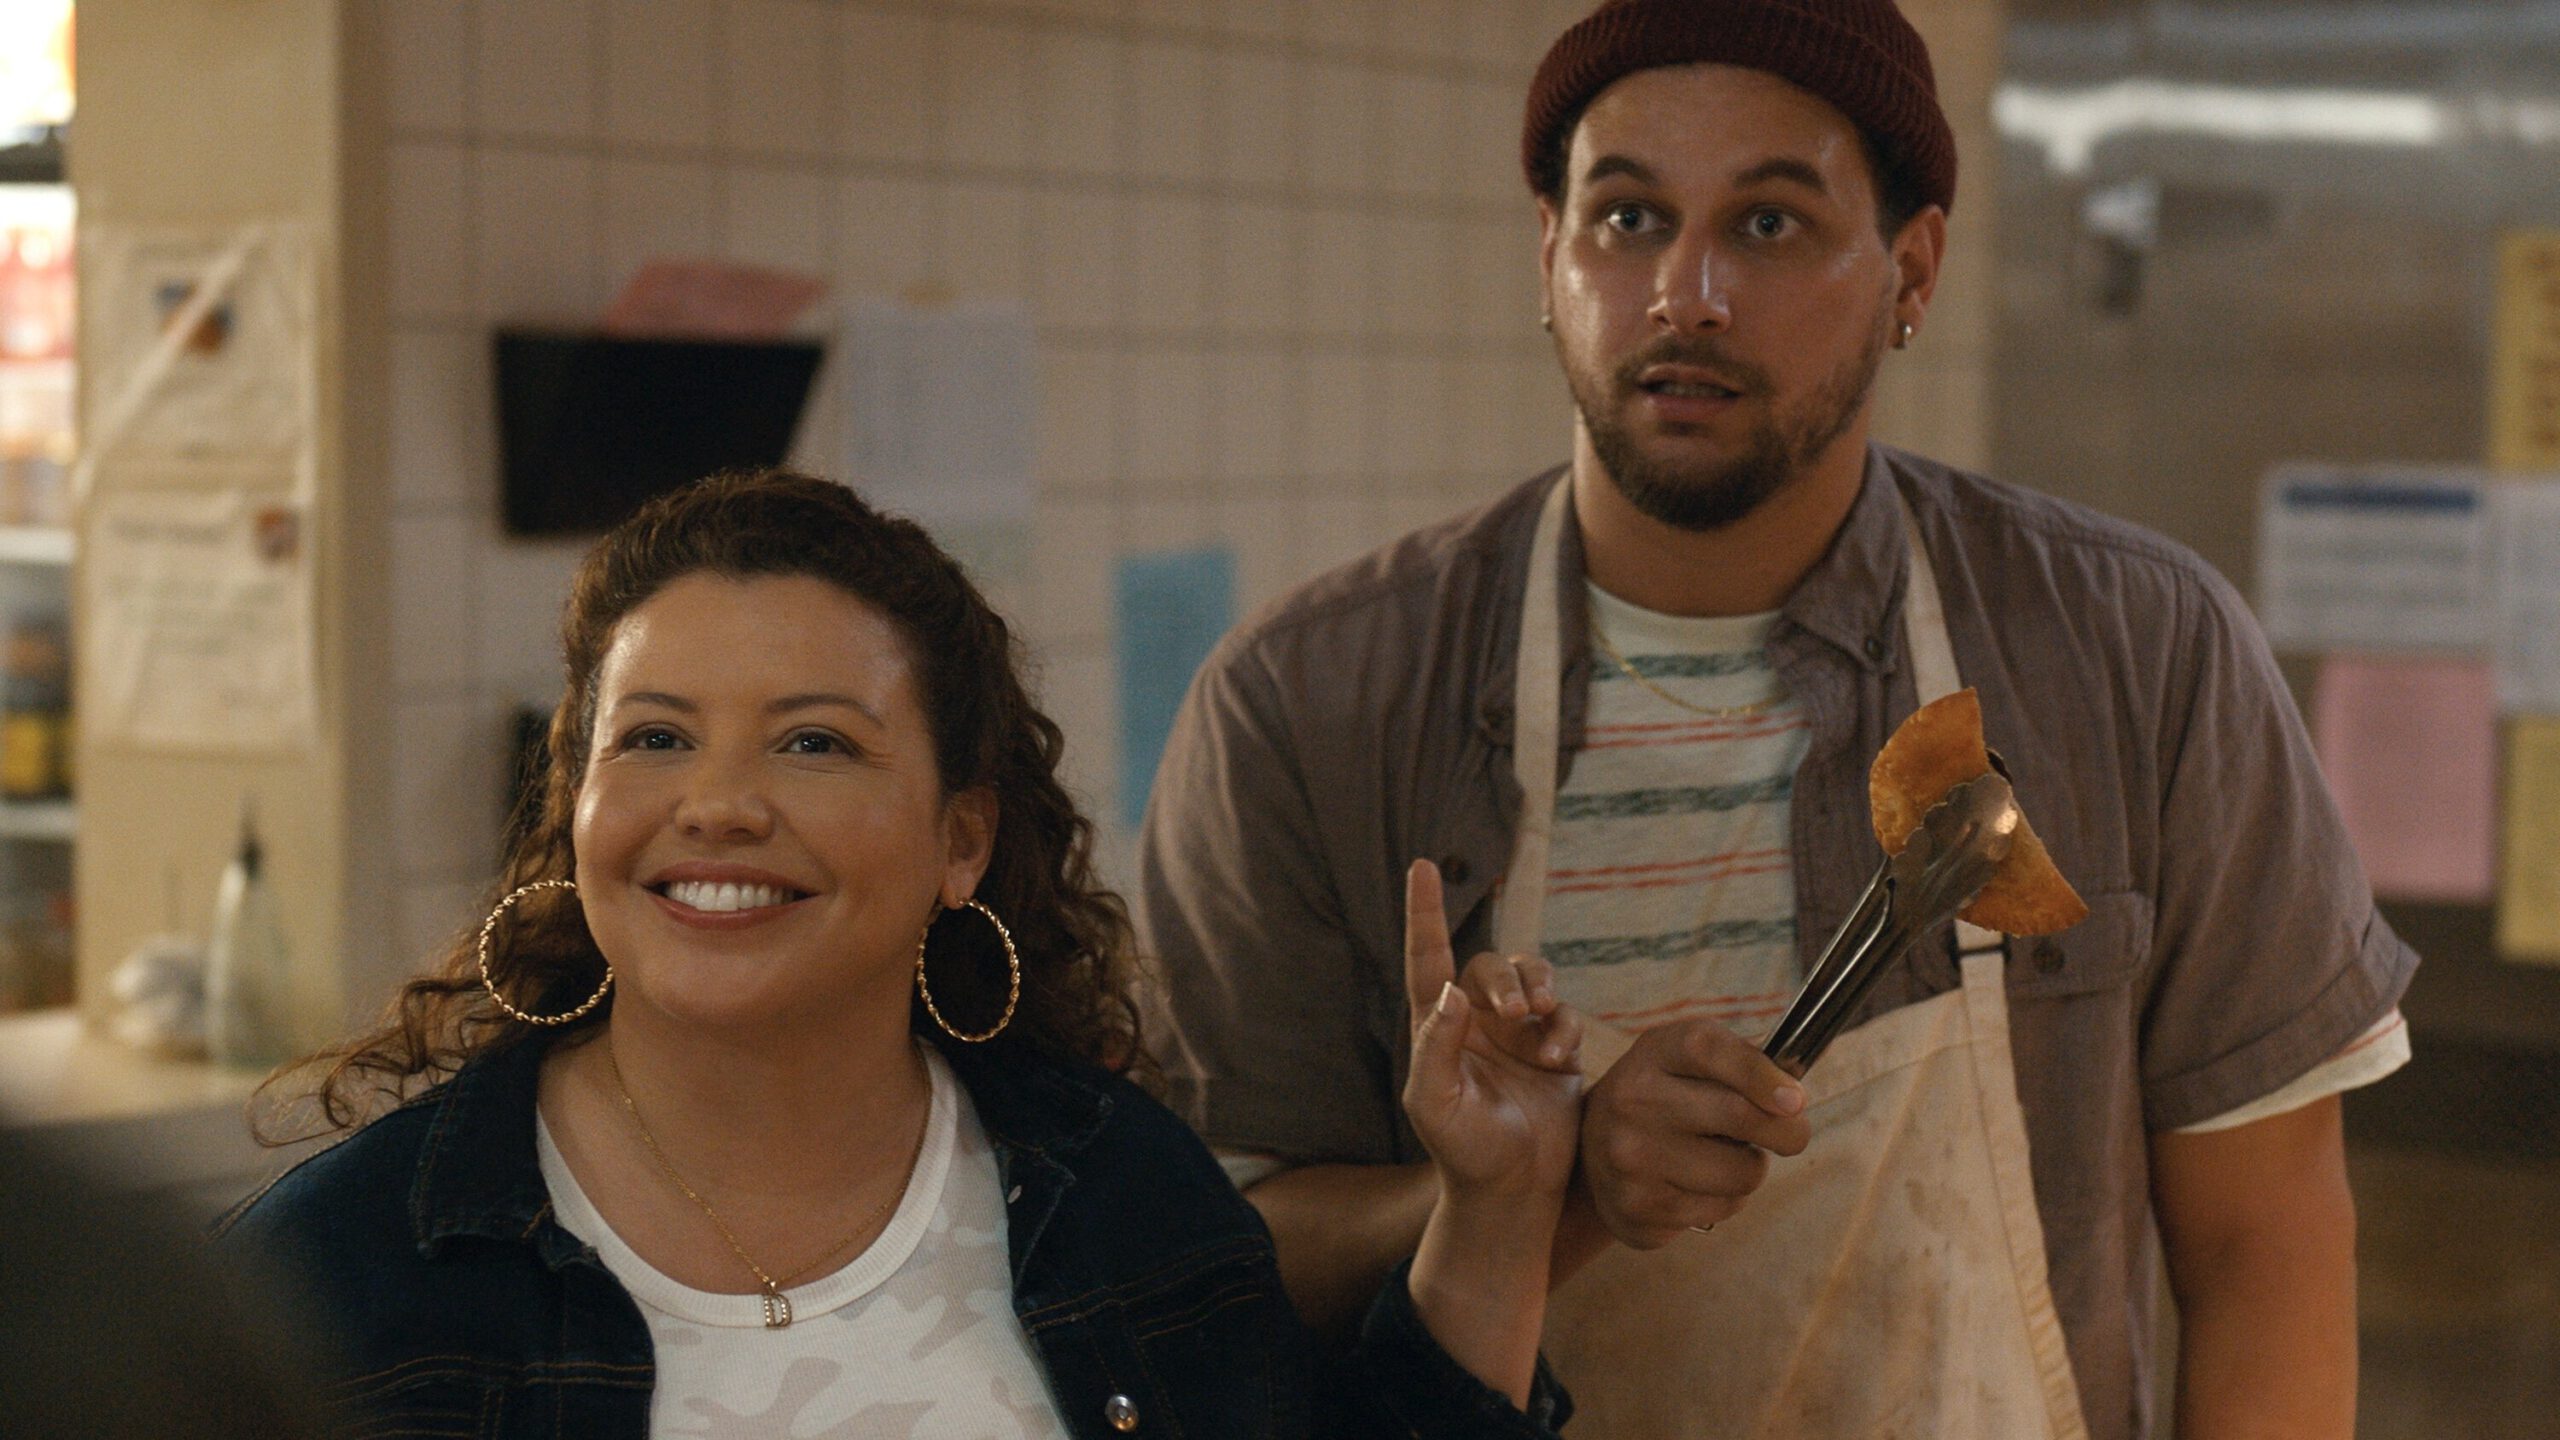 A woman in a white t-shirt and jean jacket smiles and points to a man in an apron and maroon beanie holding an empanada in some tongs.